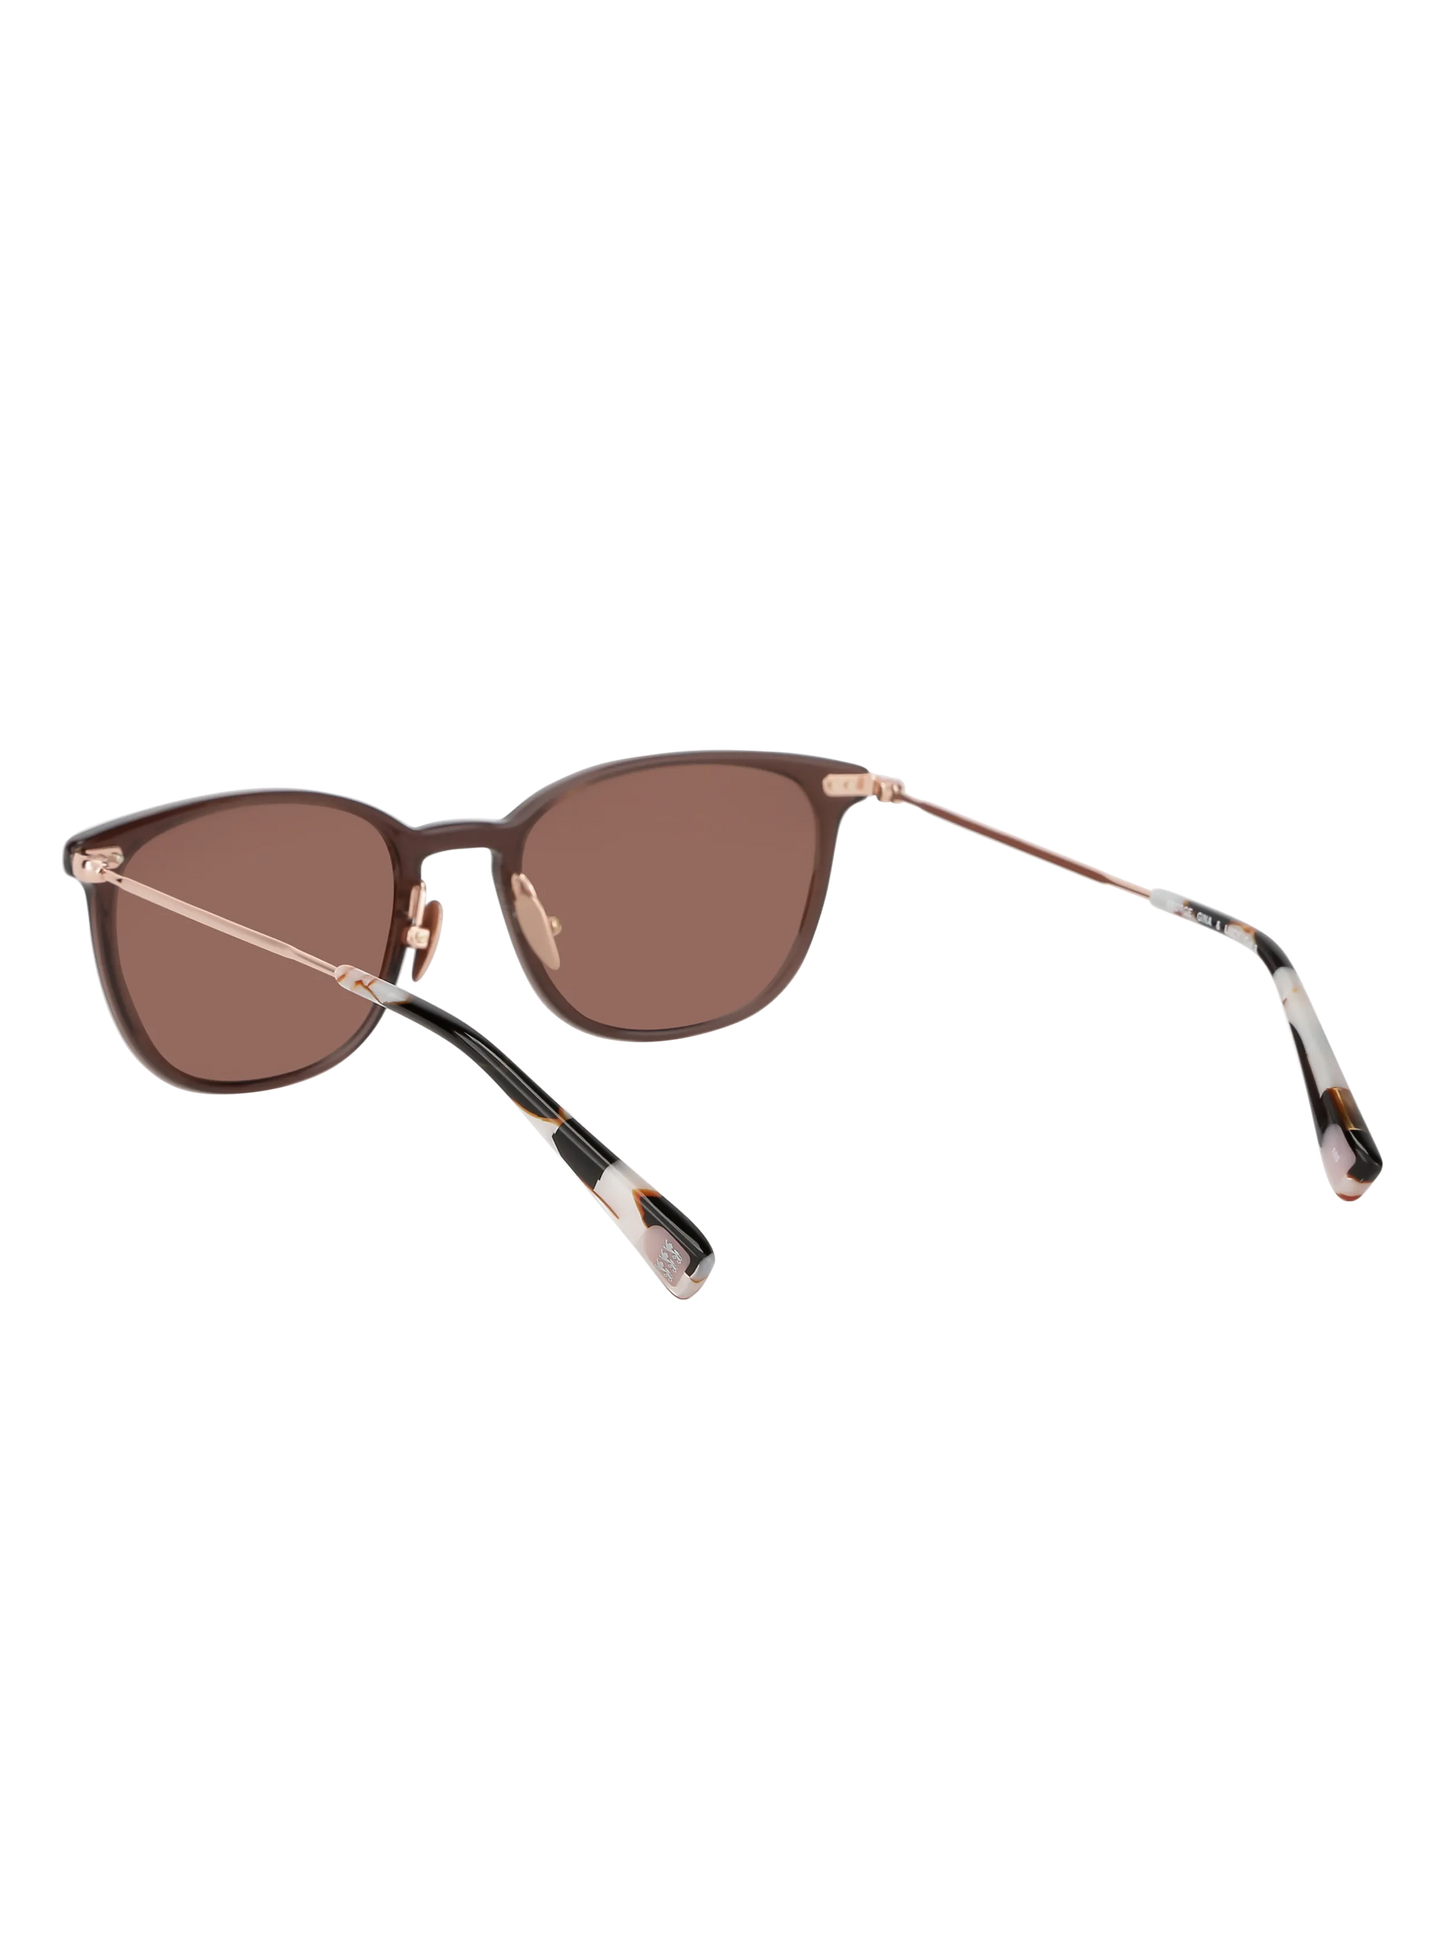 Farbe_clear brown rosegold 003